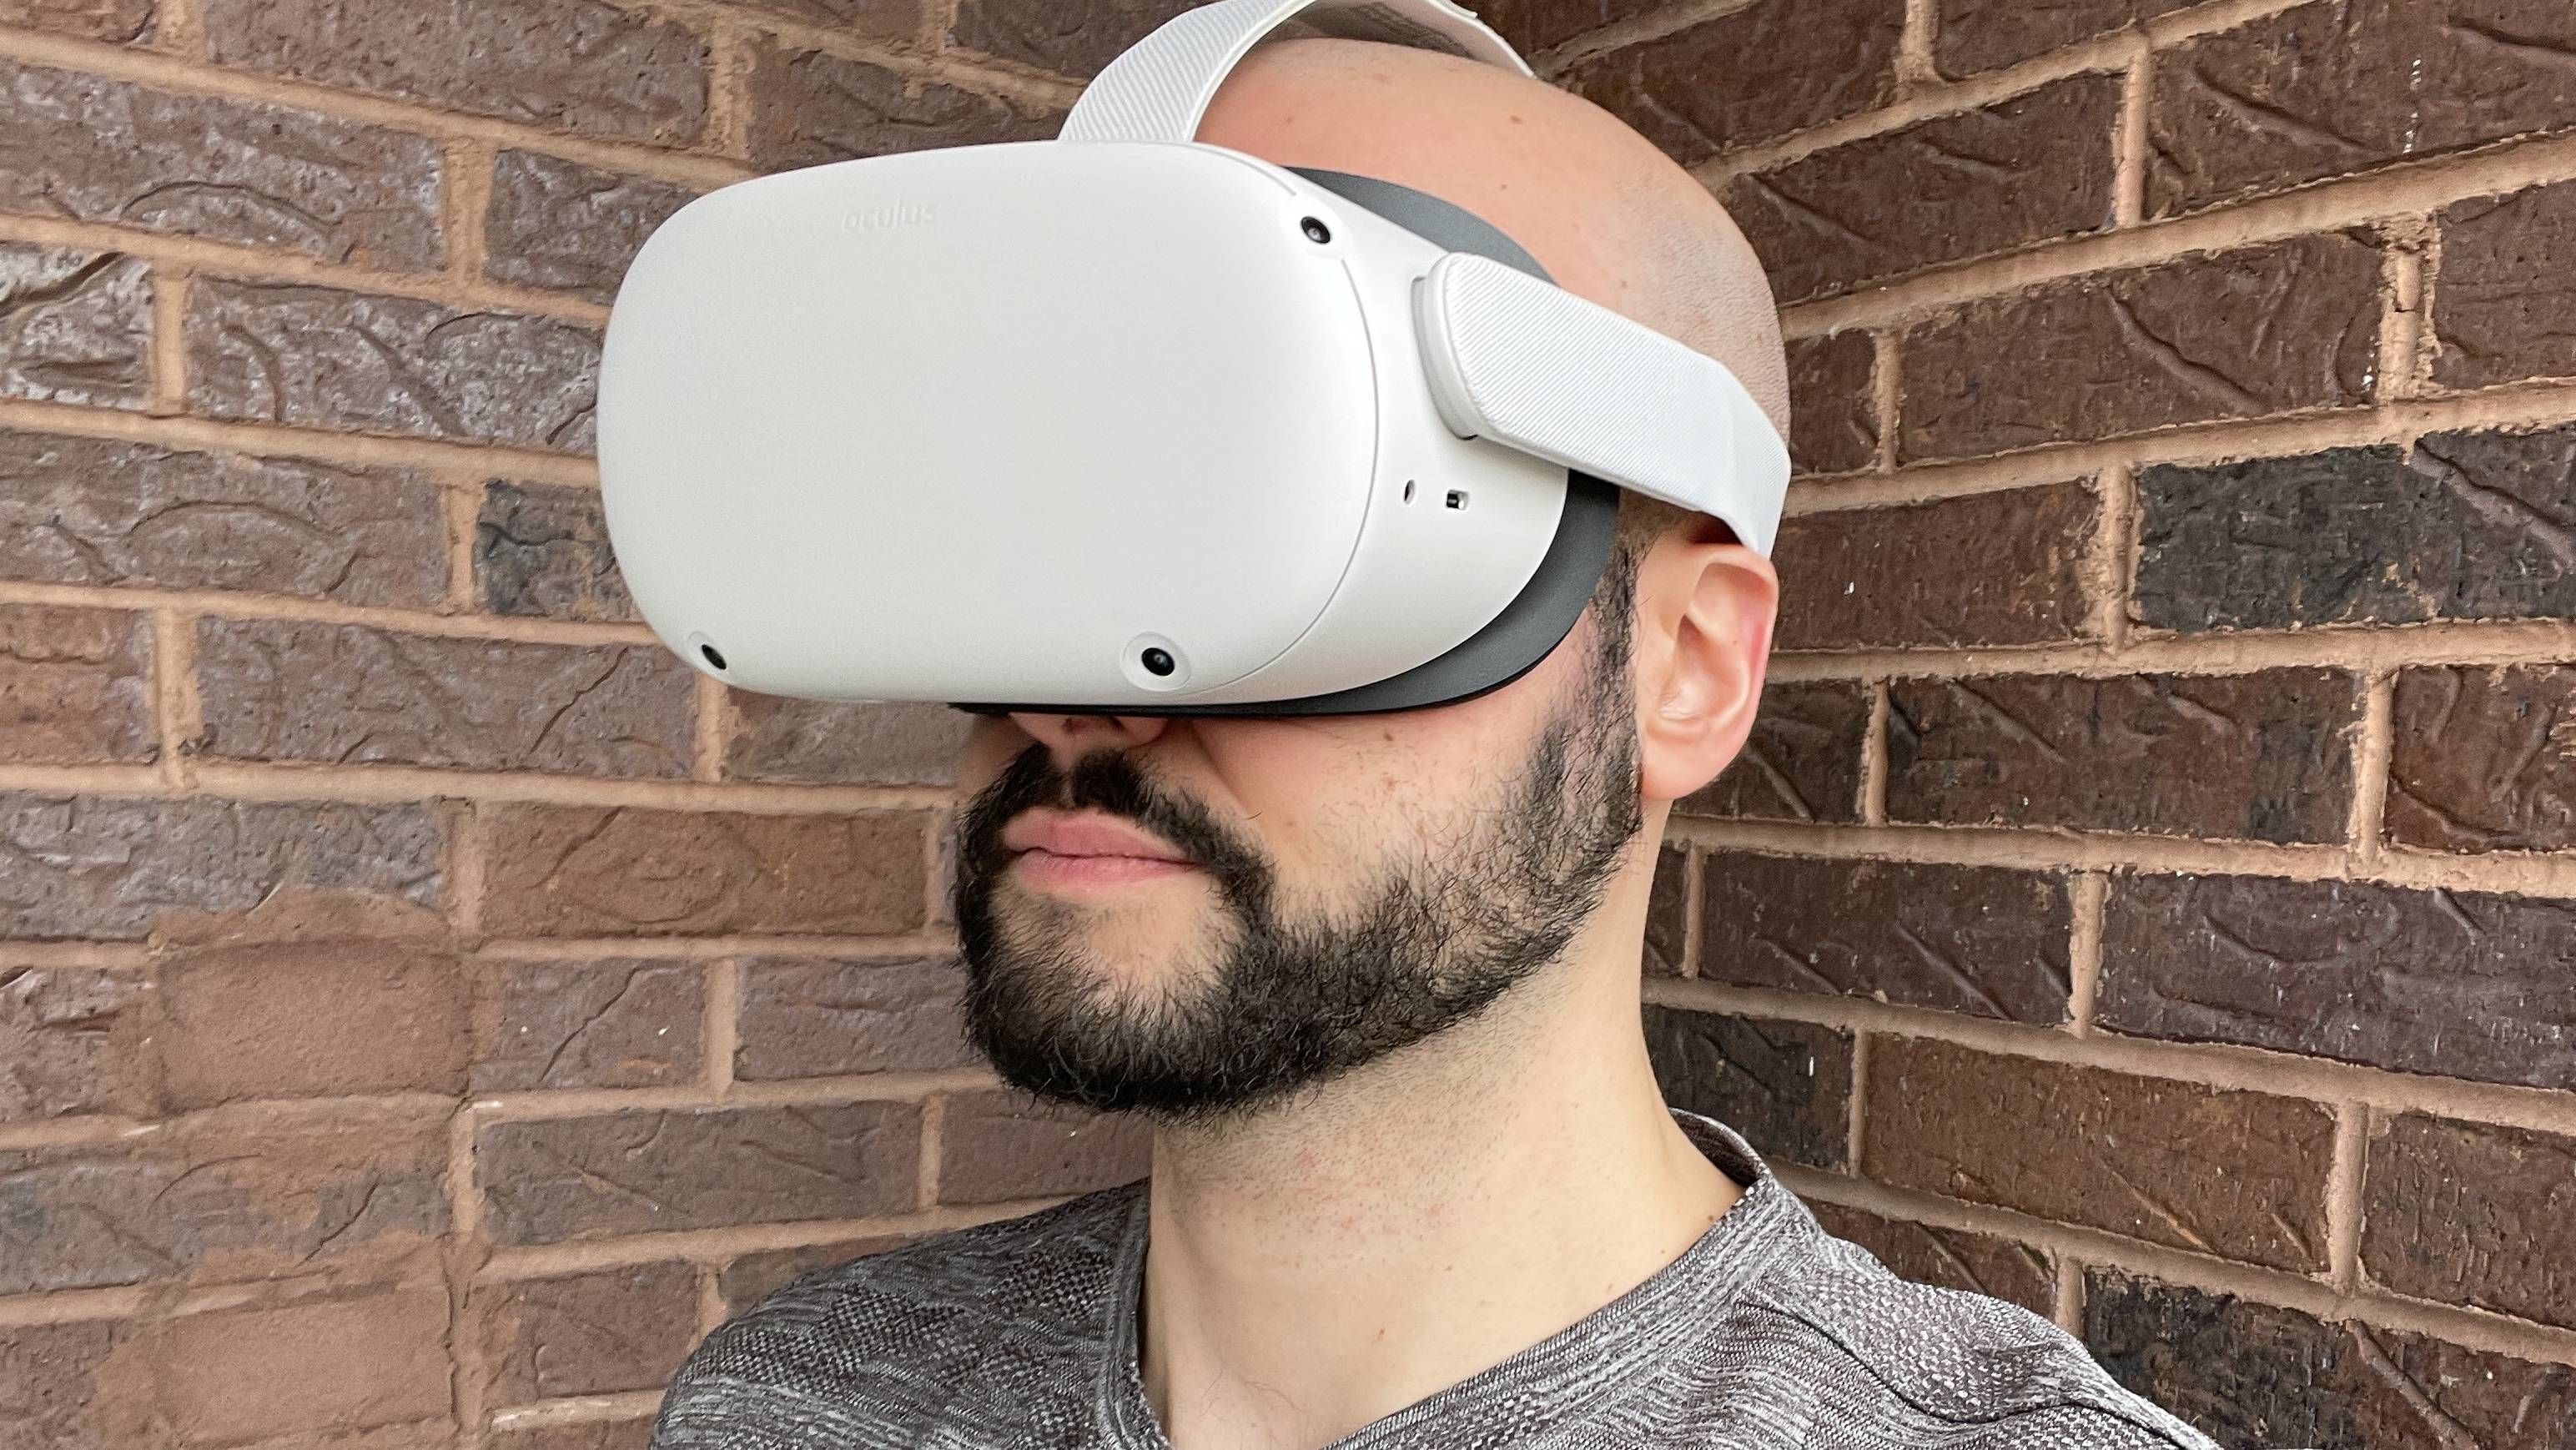 Oculus Quest 2 Review: Easy, Excellent VR at an Amazing Price